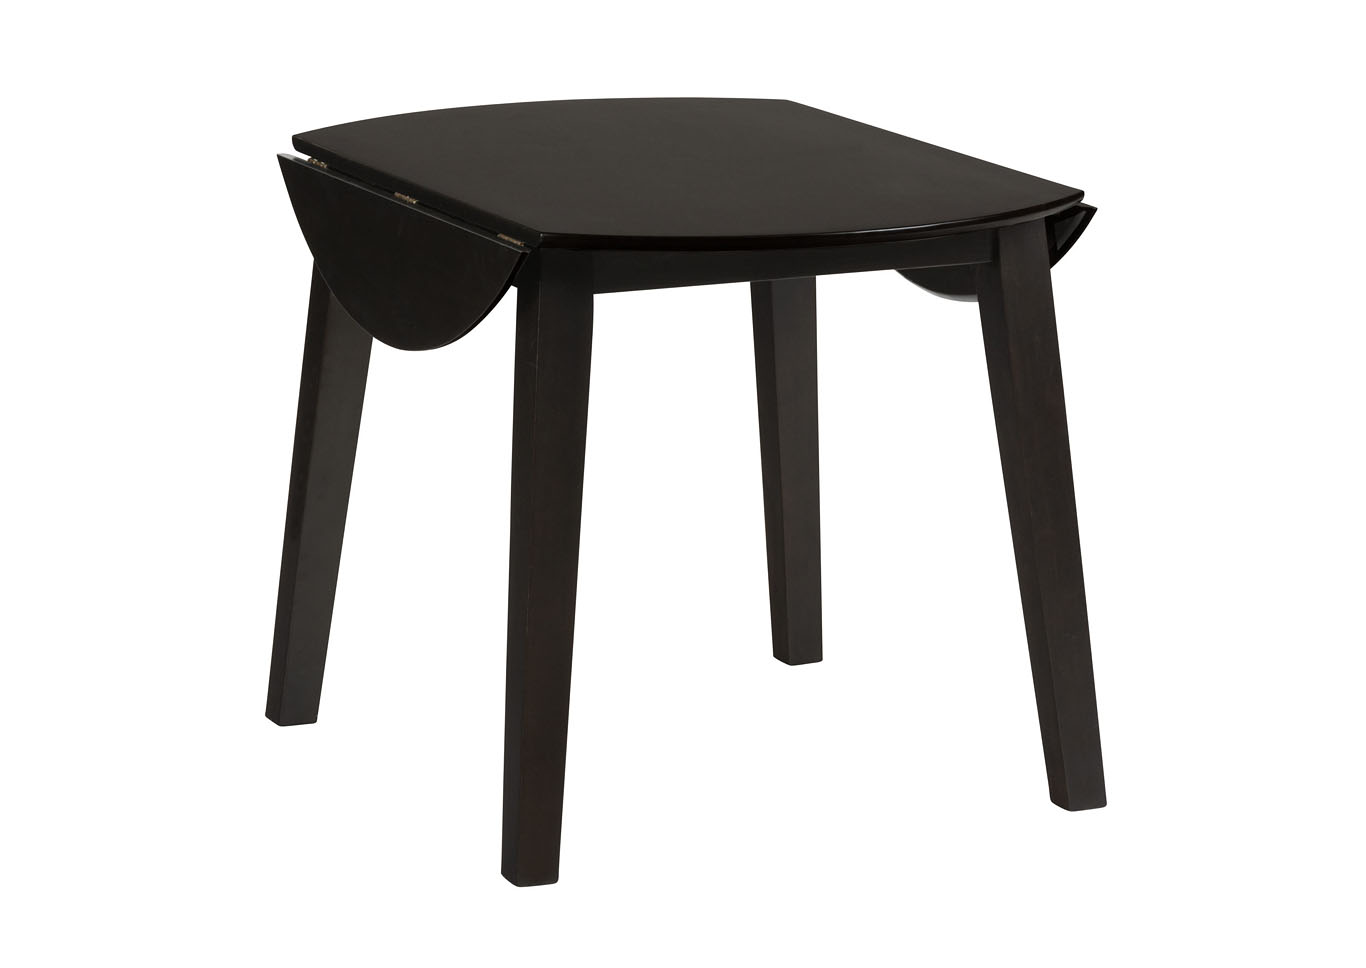 Simply Drop Leaf Table and 2 Chairs - Espresso,Instore